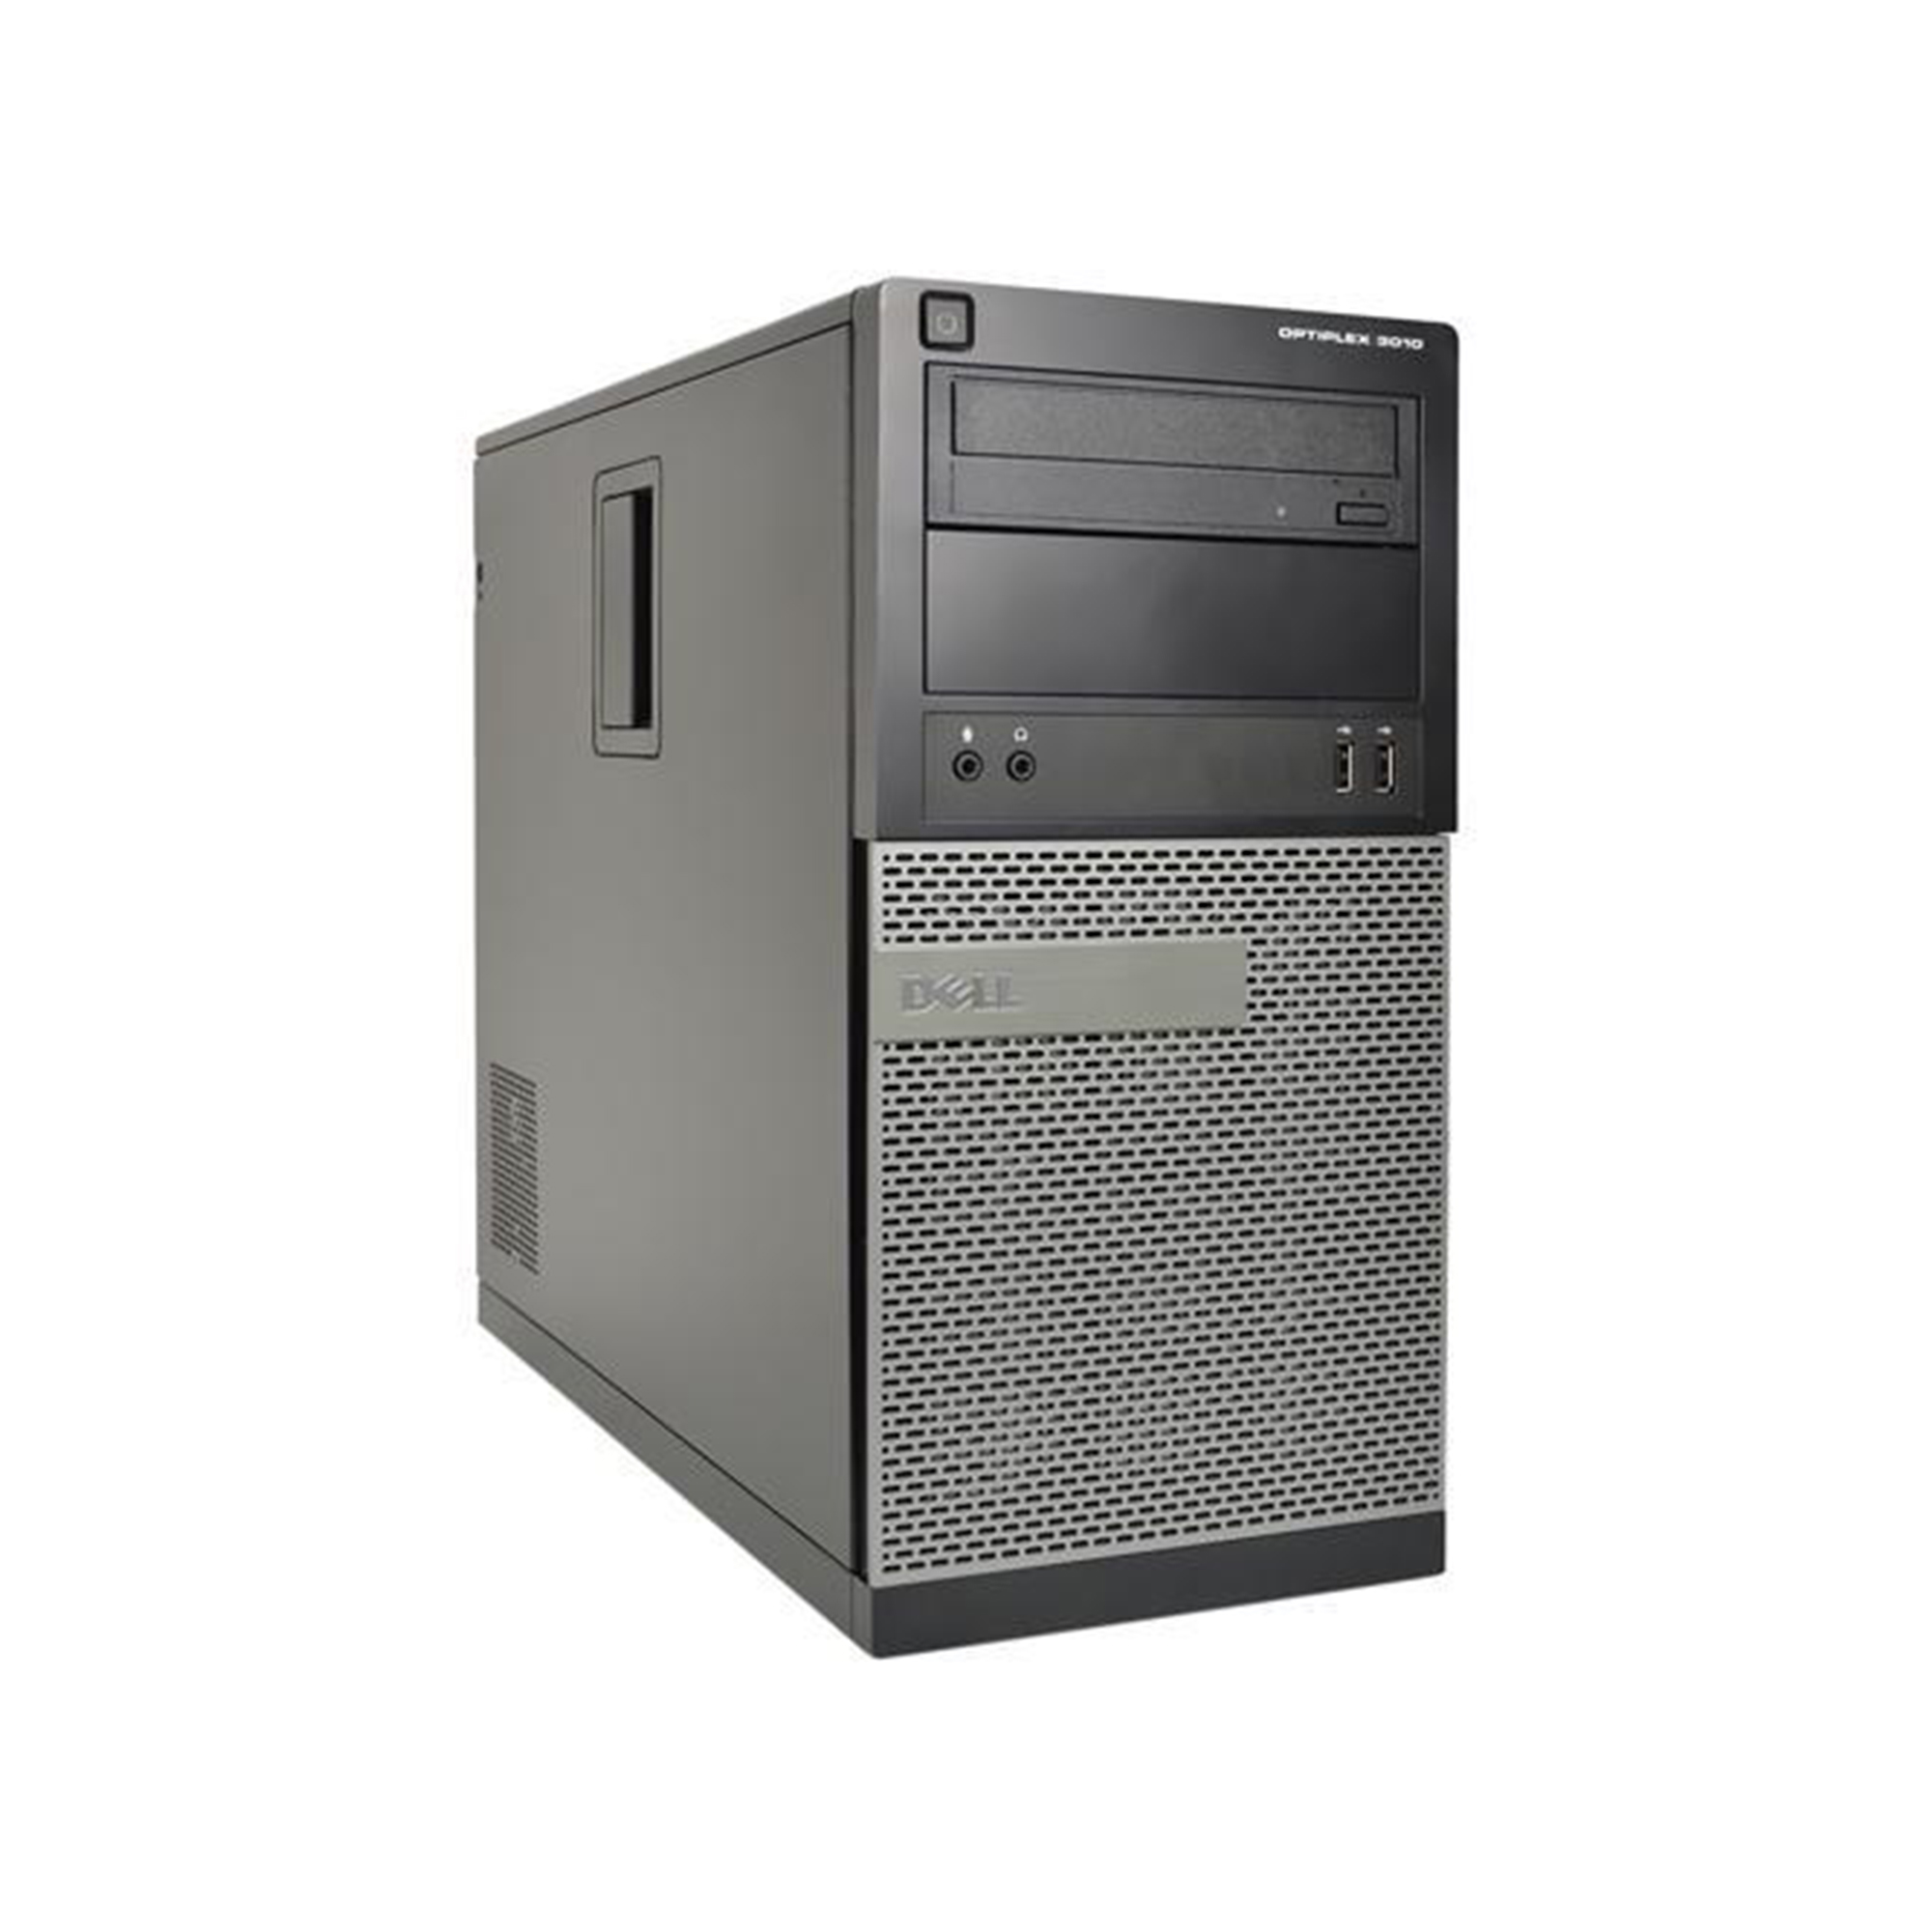 "DELL Optiplex 3010 Tower Computer PC, Intel Quad-Core i5, 1TB HDD, 8GB DDR3 RAM, Windows 10 Pro, DVD, WIFI, USB Keyboard and Mouse (Used - Like New)" - image 2 of 3